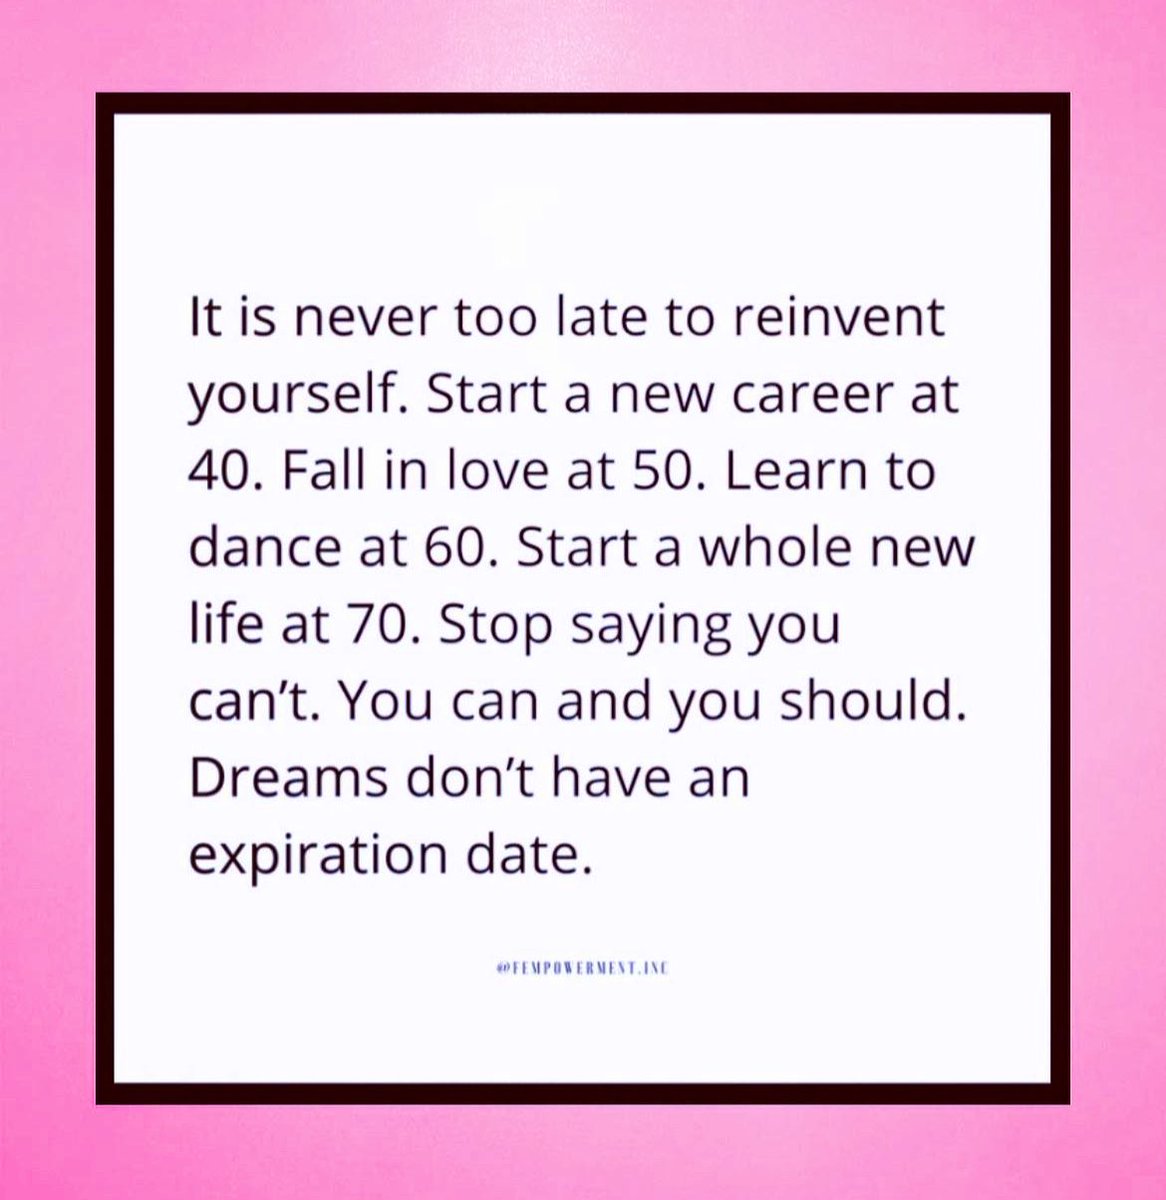 ✨ It's never too late to reinvent yourself! No matter your age, it's always the right time for a fresh start and new adventures🌸💗.#NeverTooLate #FreshStart 🌟